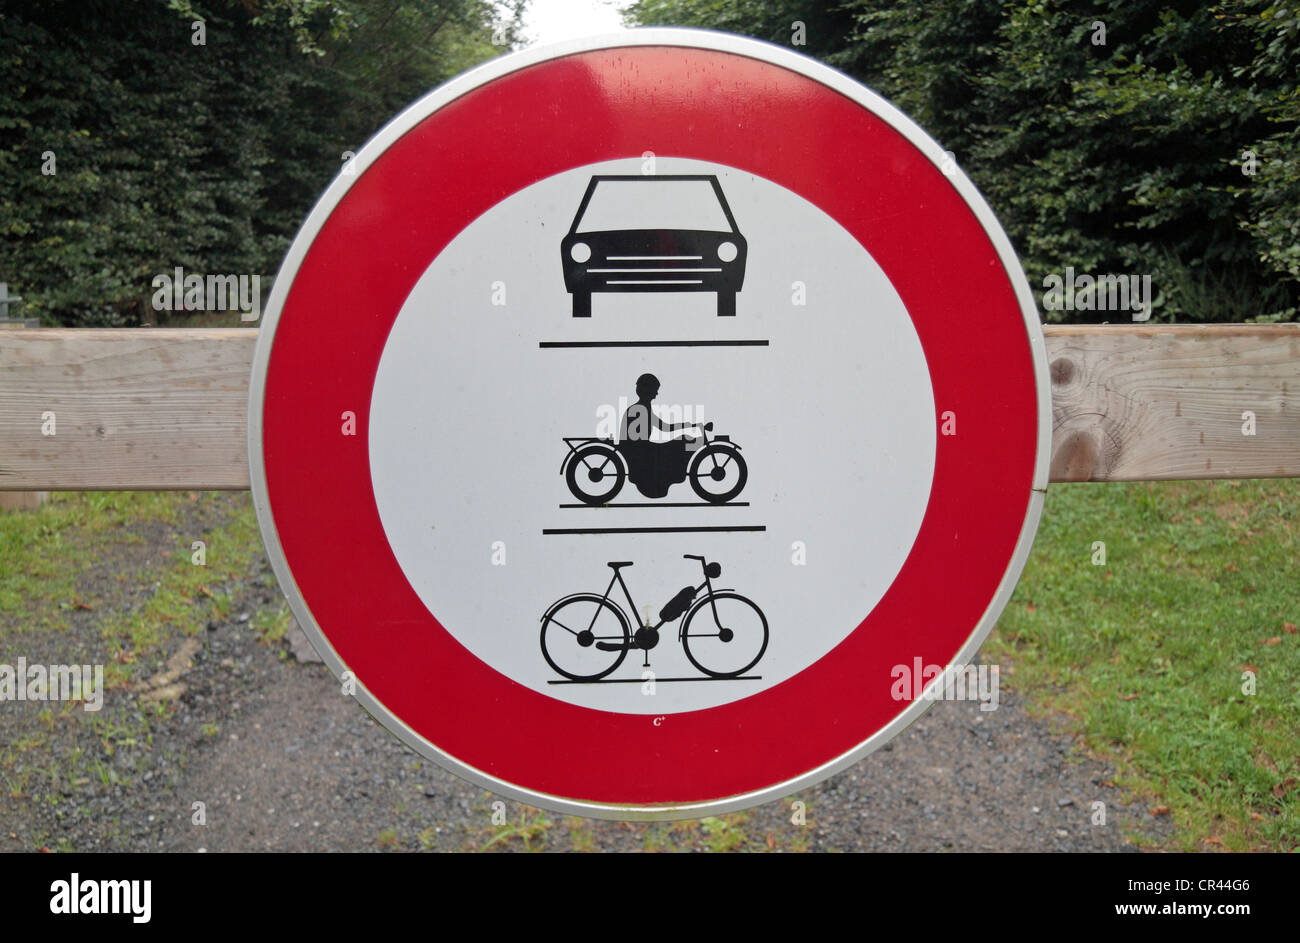 A sign banning cars, motorcycles and cycles from the Bois de la Paix (the Wood of Peace), near Bastogne, Walloon, Belgium. Stock Photo